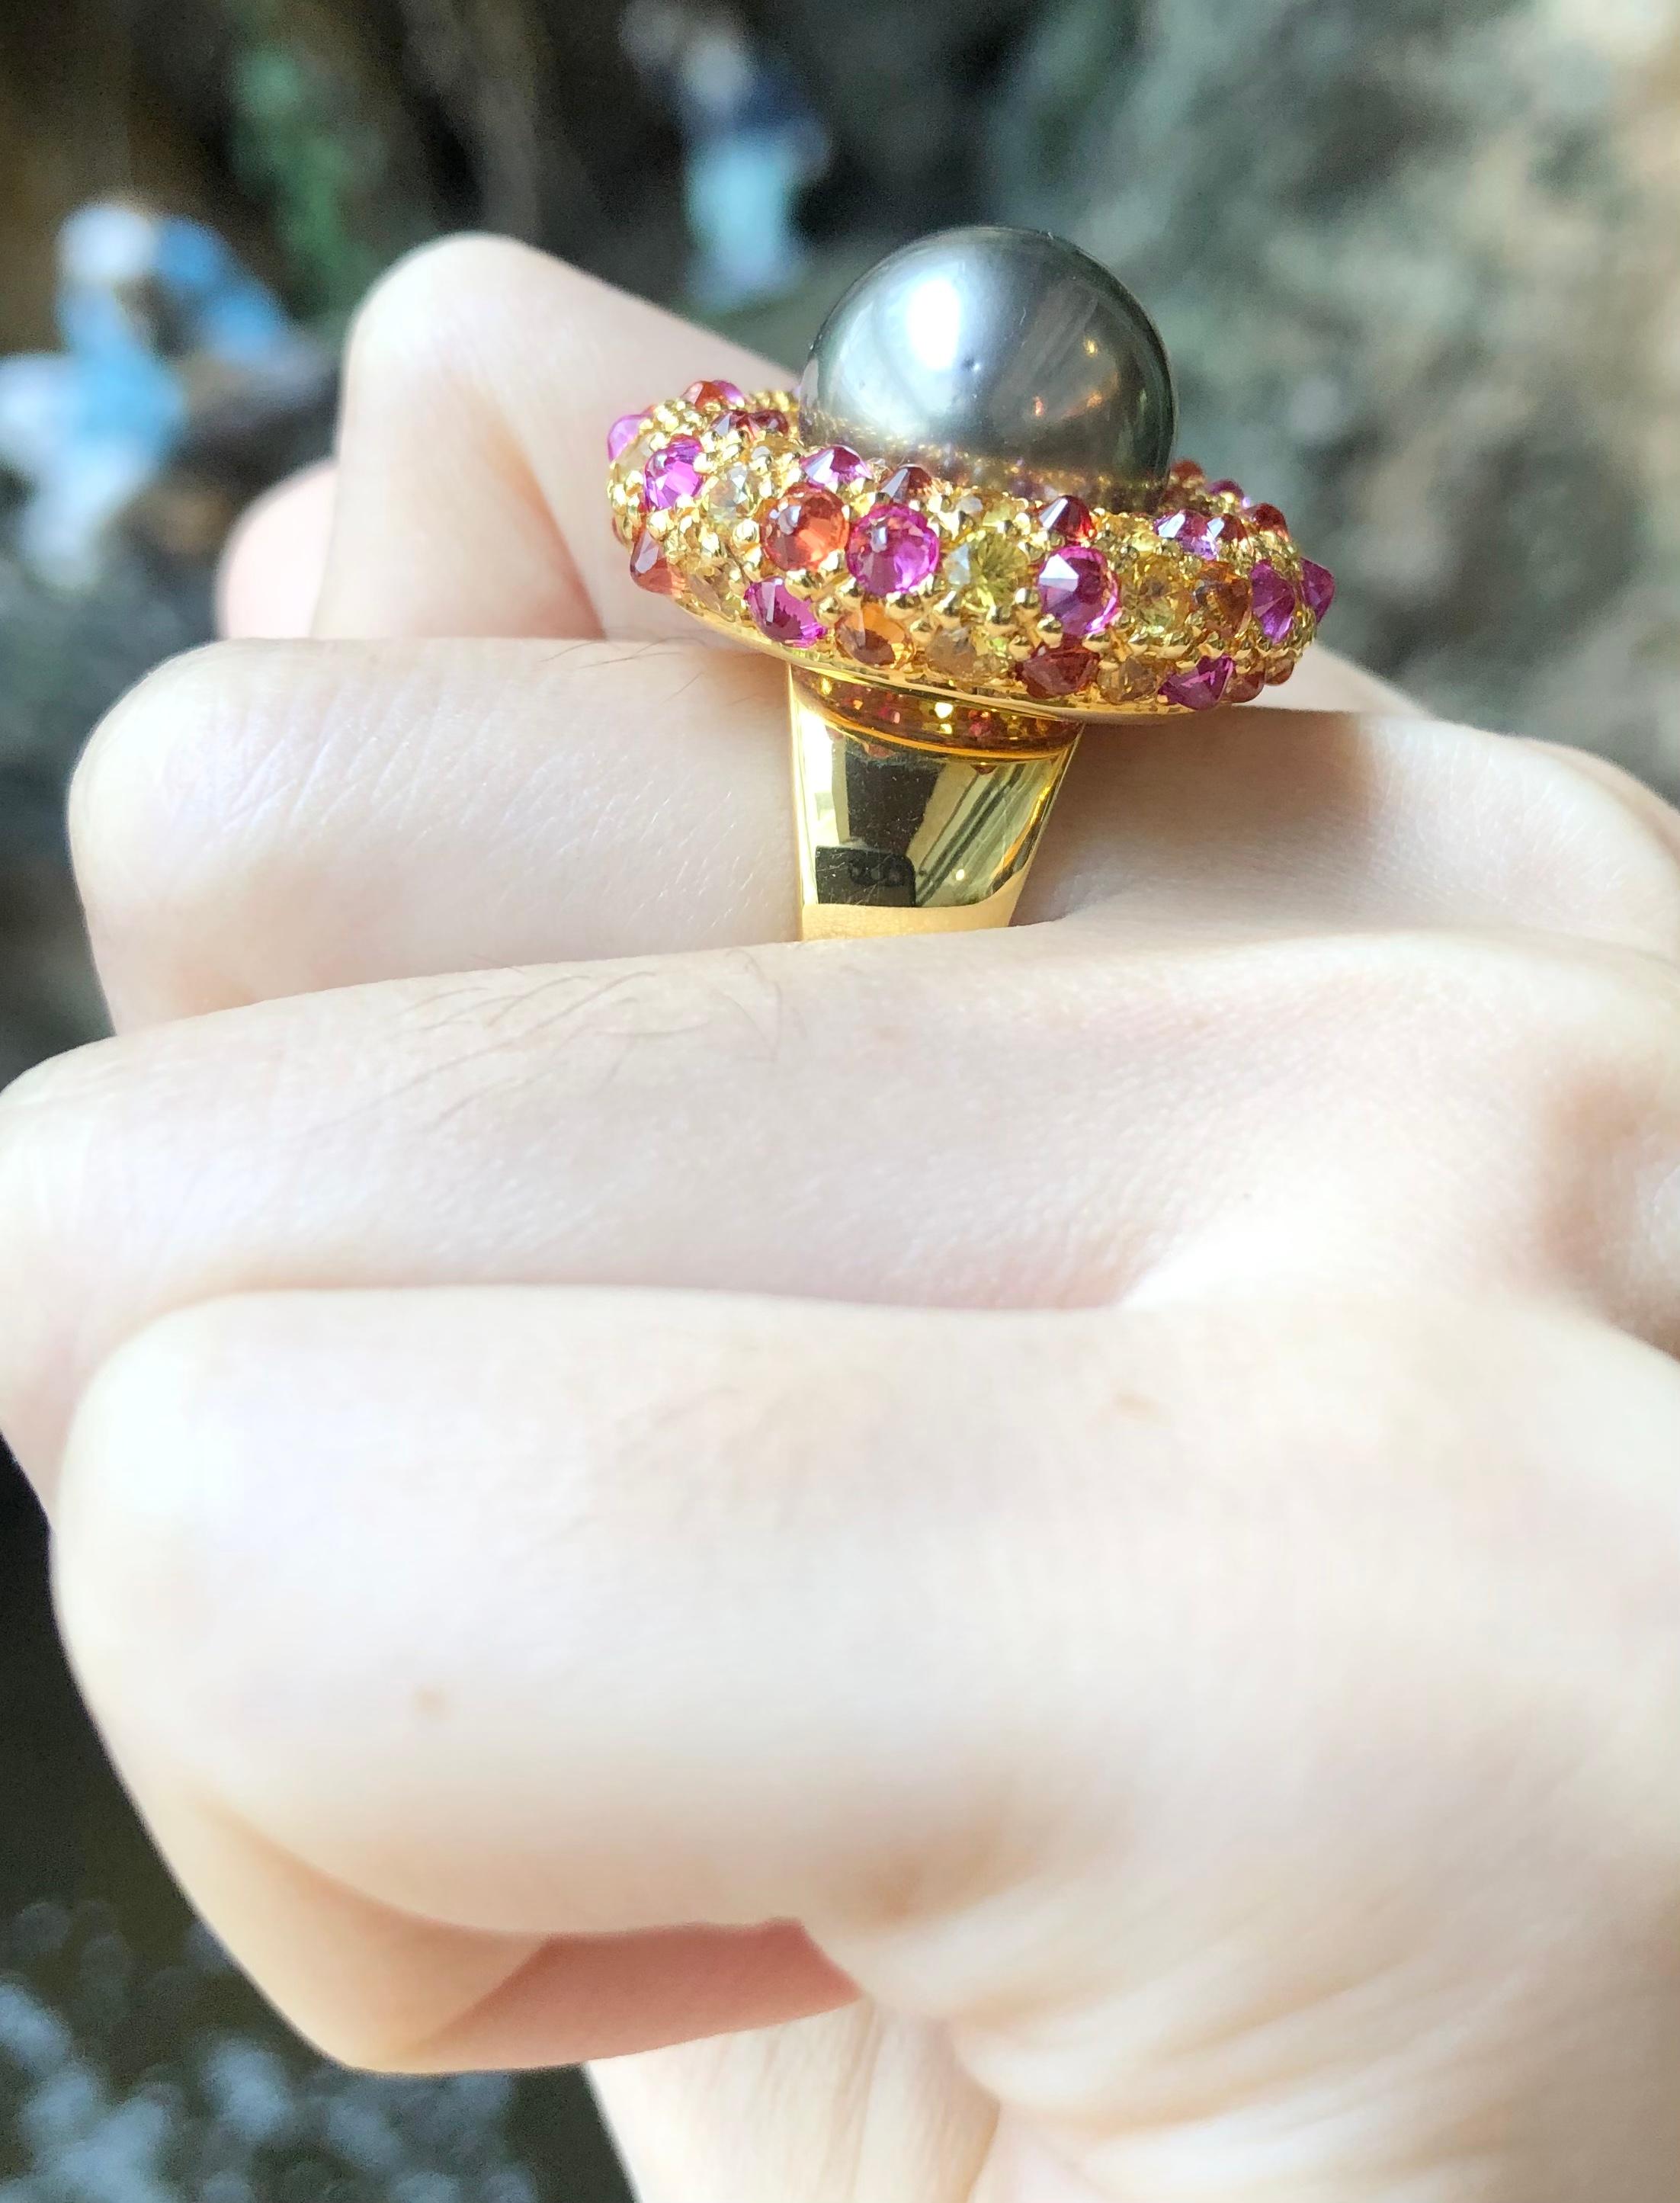 Pearl with Rainbow Color Sapphire 7.75 carats Ring set in 18 Karat Gold Settings

Width:  2.5 cm 
Length: 2.5 cm
Ring Size: 53
Total Weight: 19.87 grams

Pearl: 13.4 mm

